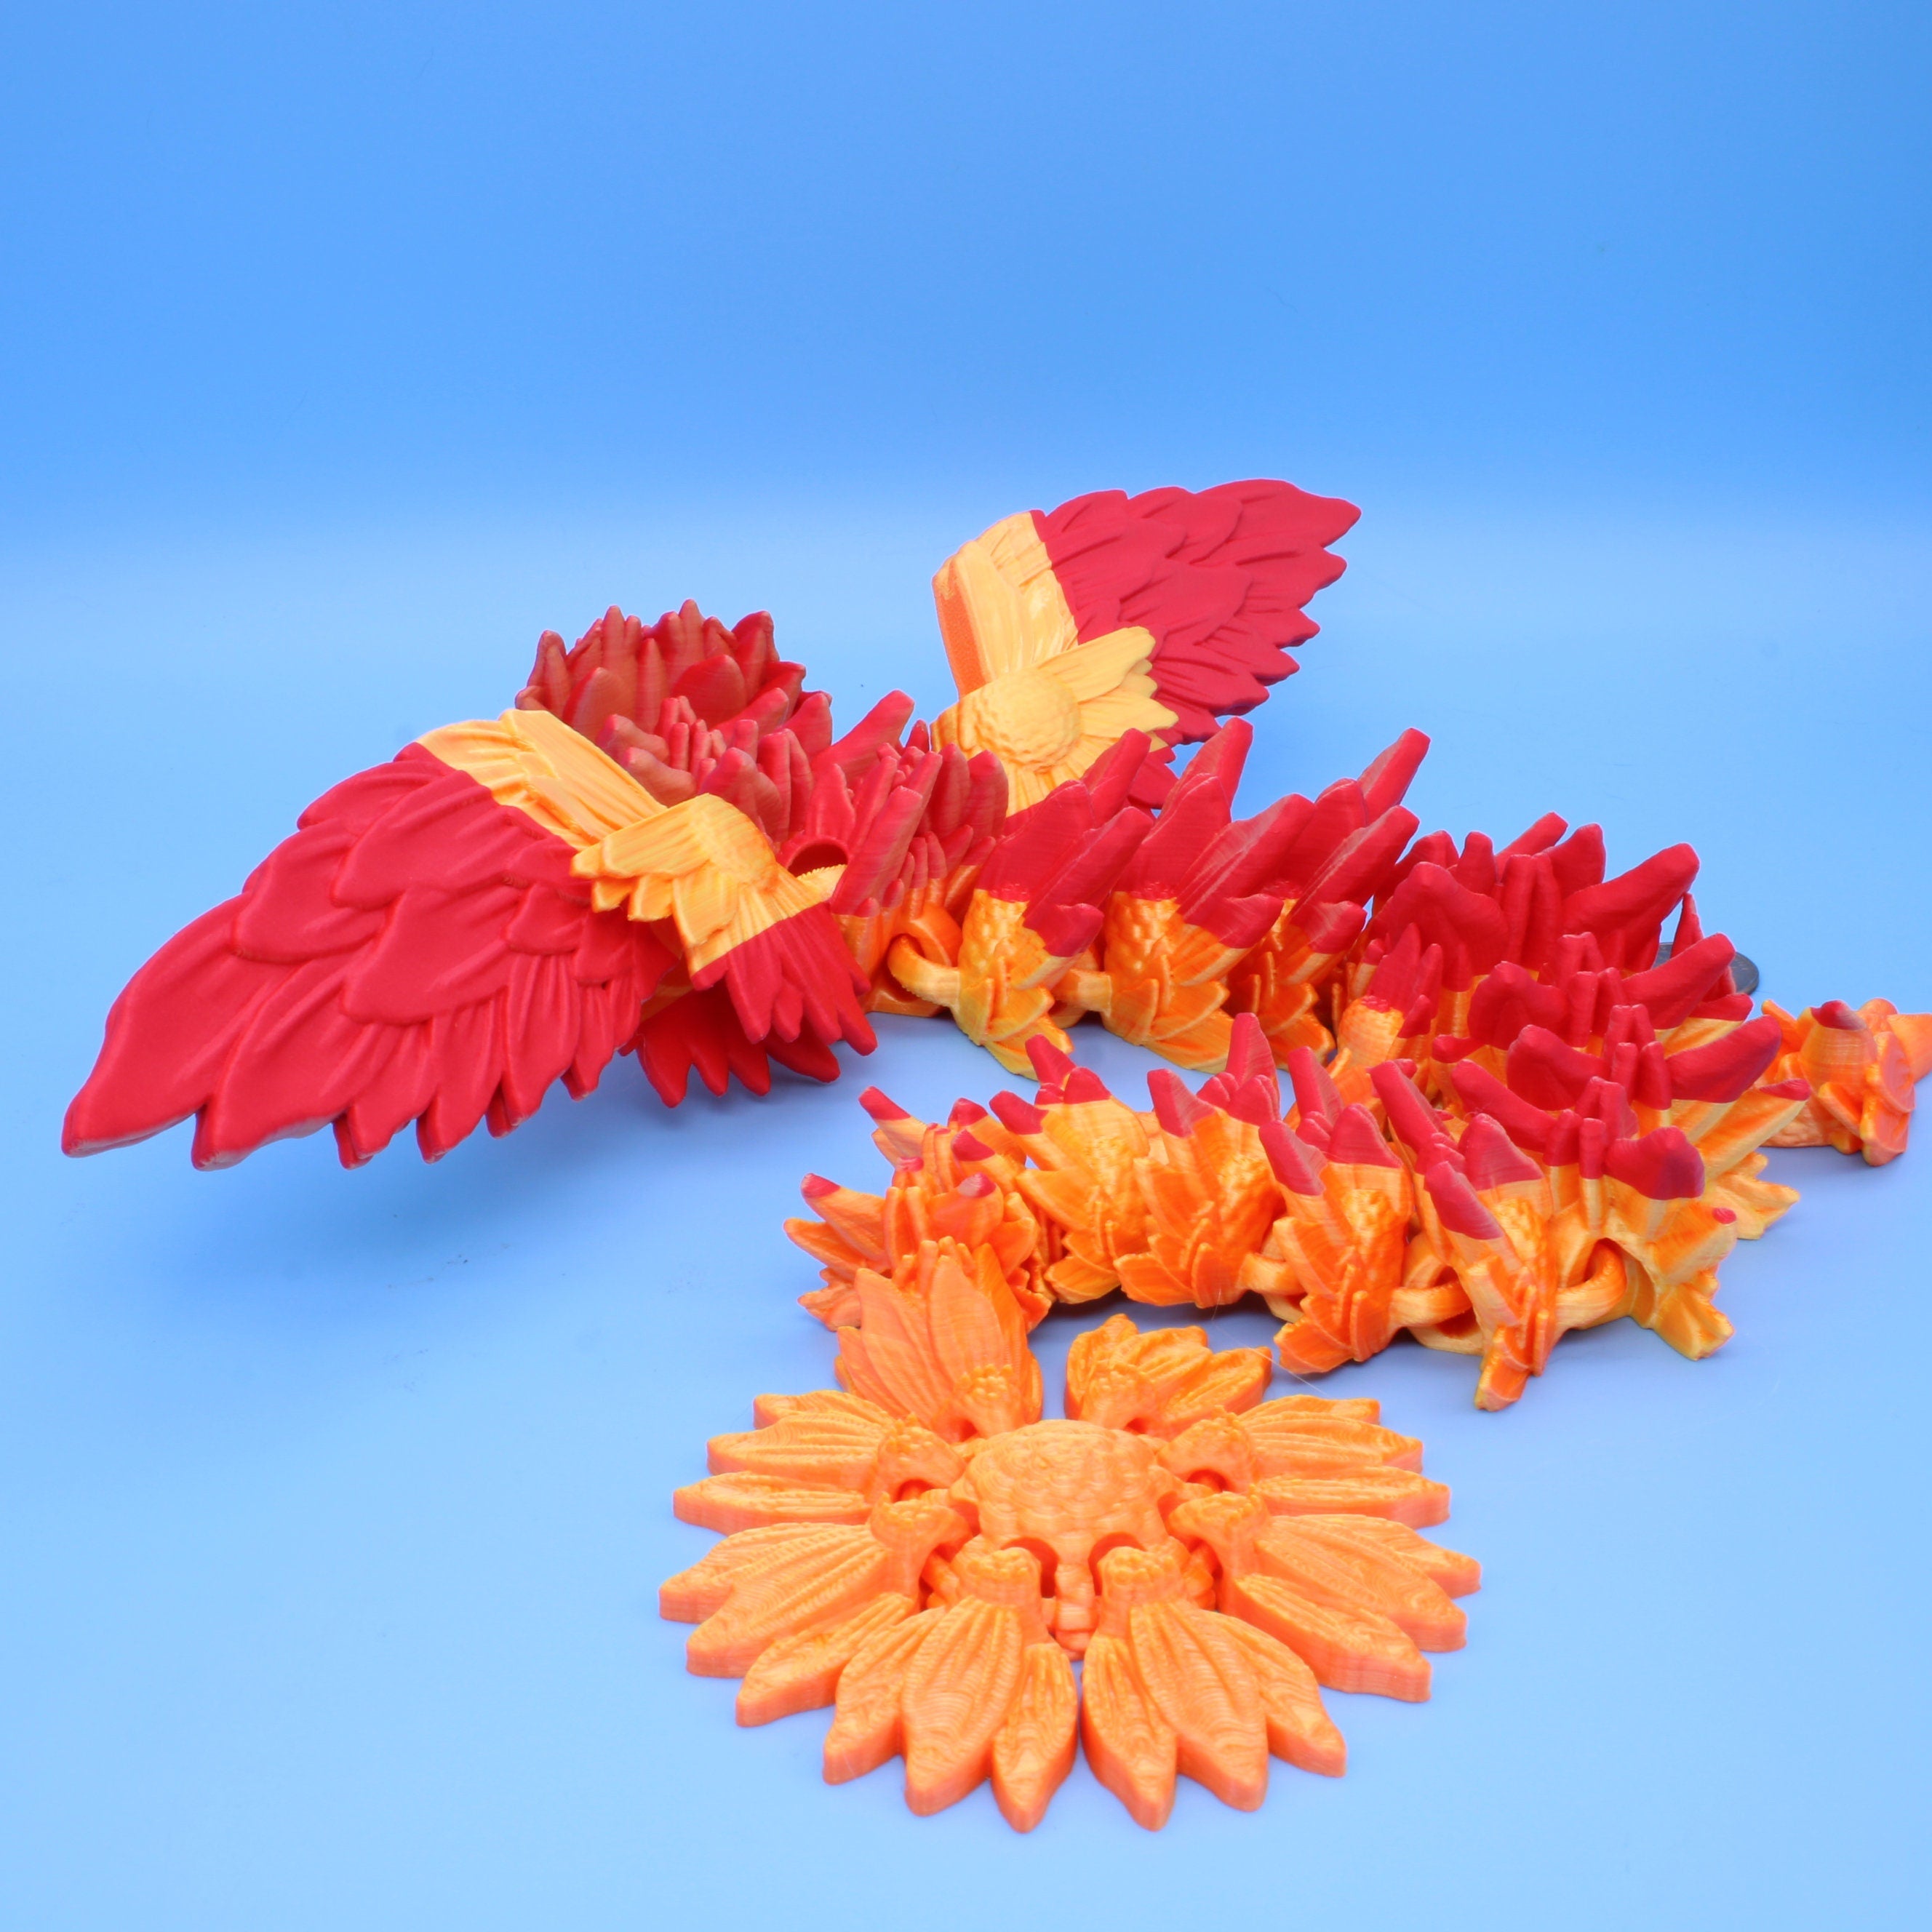 Surprise / Mystery Adult Dragon | 3D printed